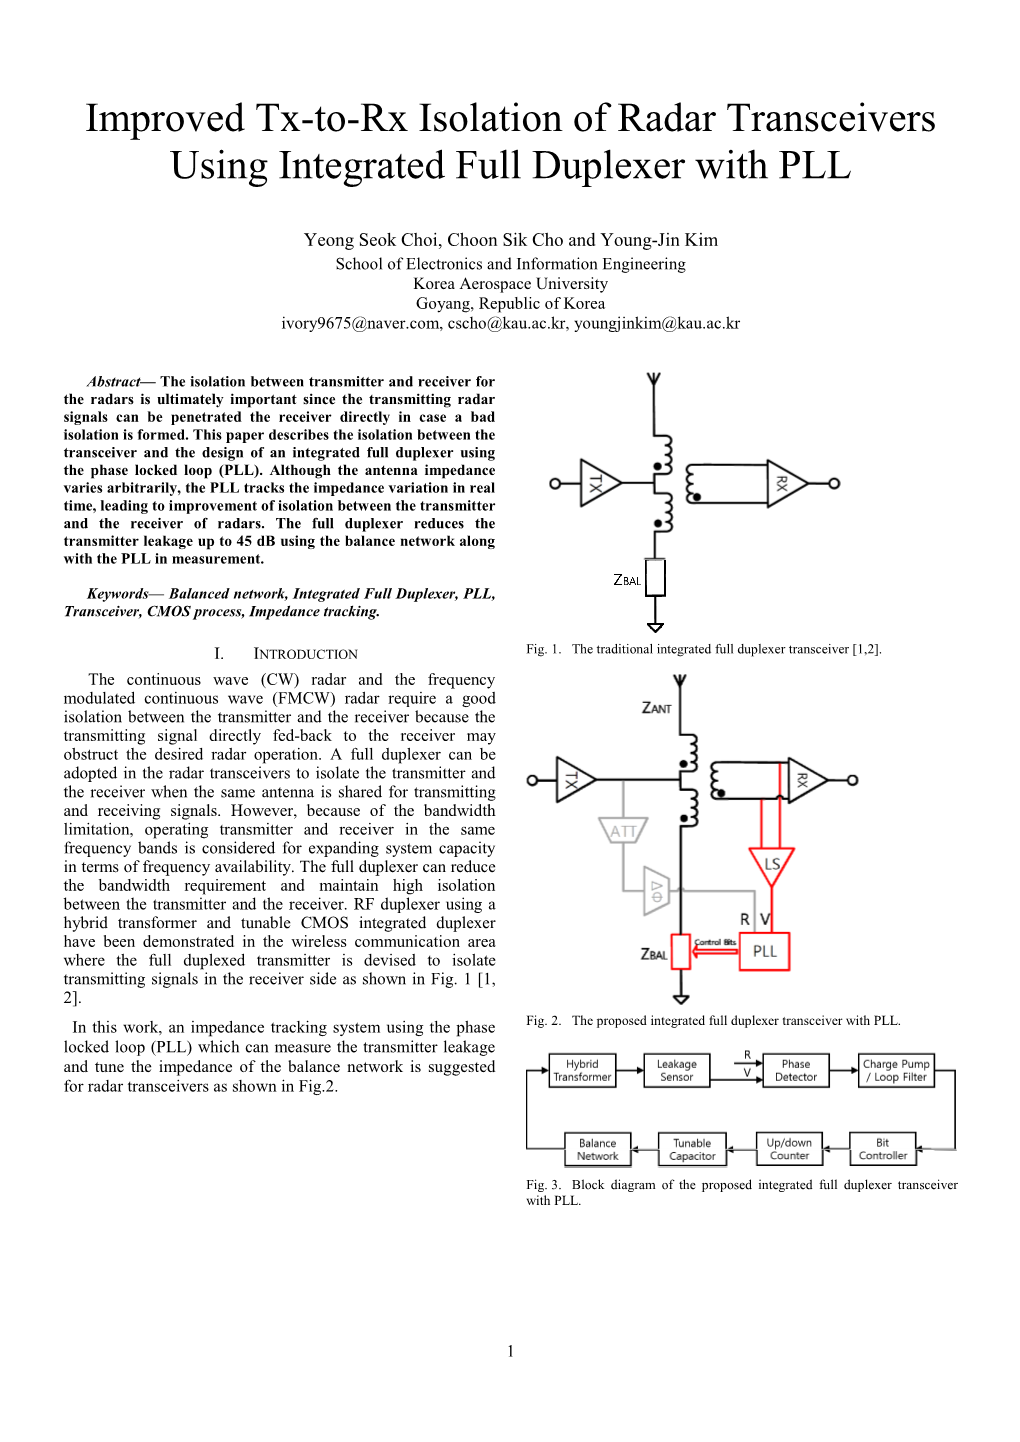 Improved Tx-To-Rx Isolation of Radar Transceivers Using Integrated Full Duplexer with PLL